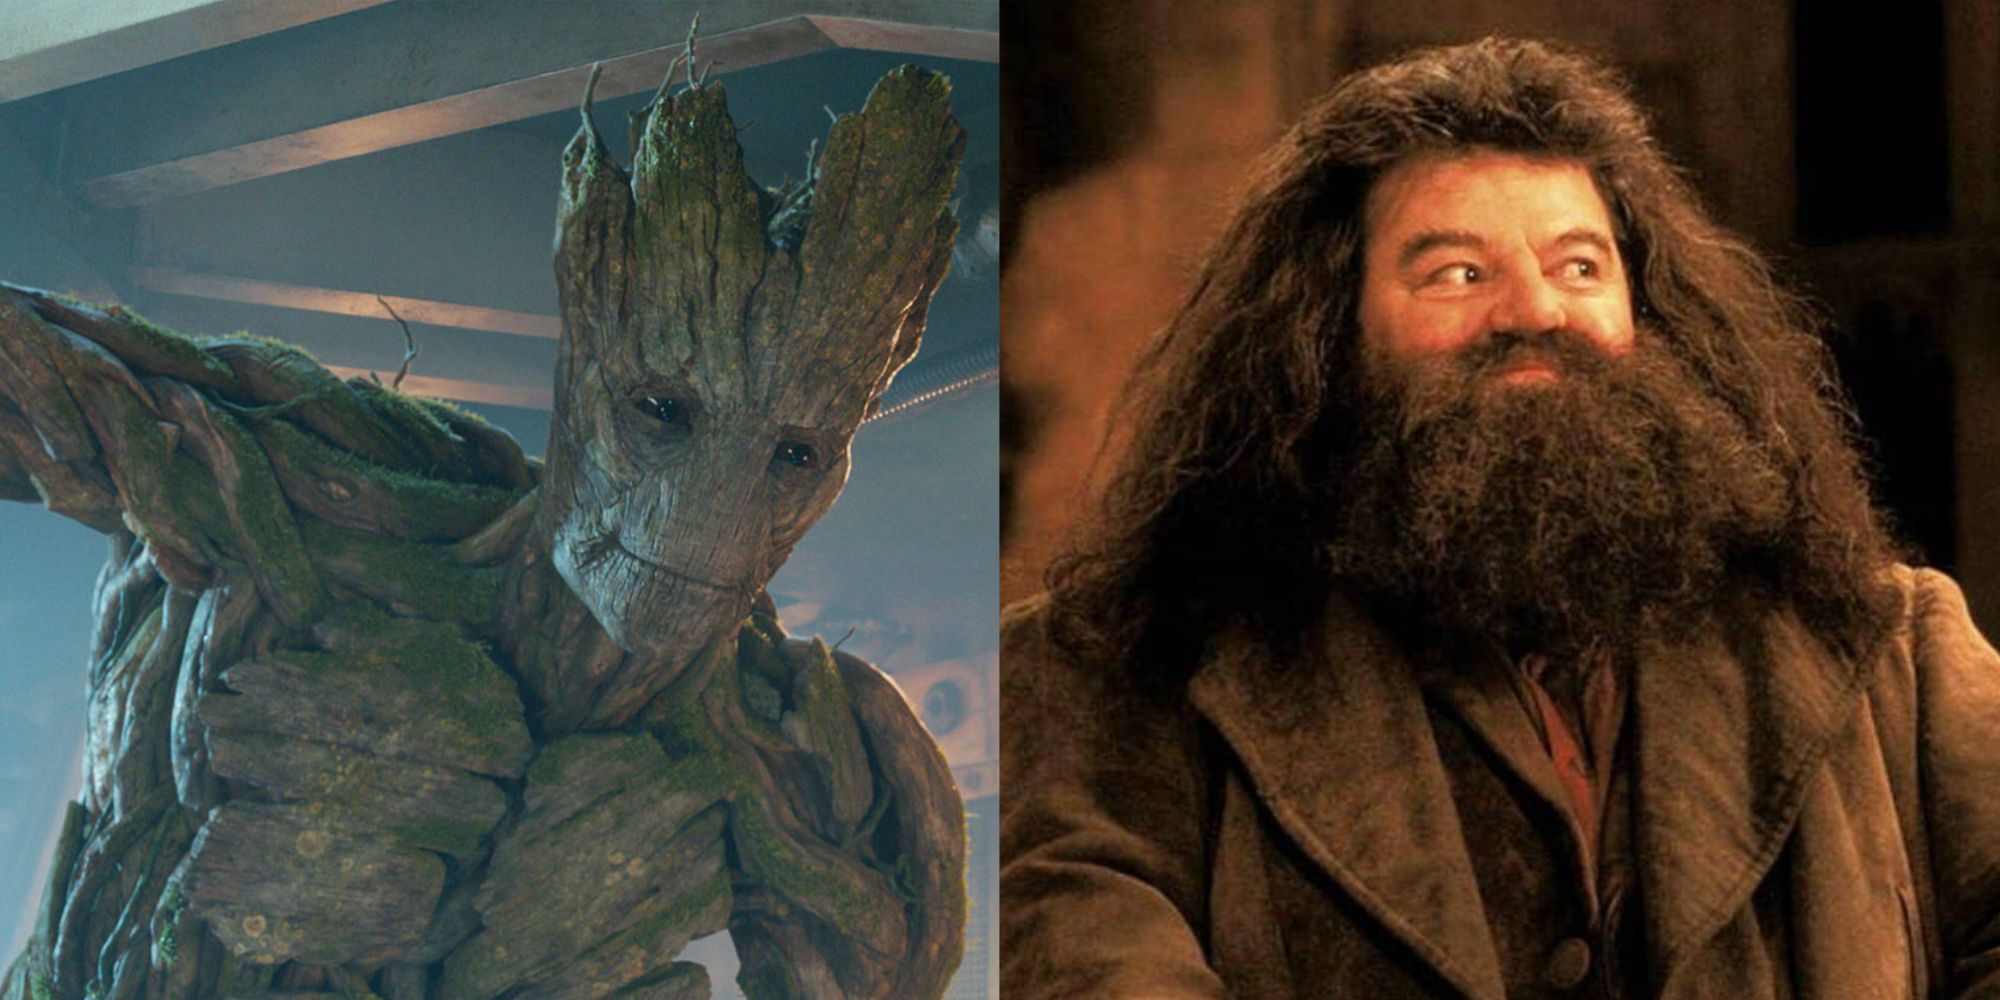 Split images of Groot smiling in Guardians of the Galaxy and Hagrid smiling in Harry Potter 2